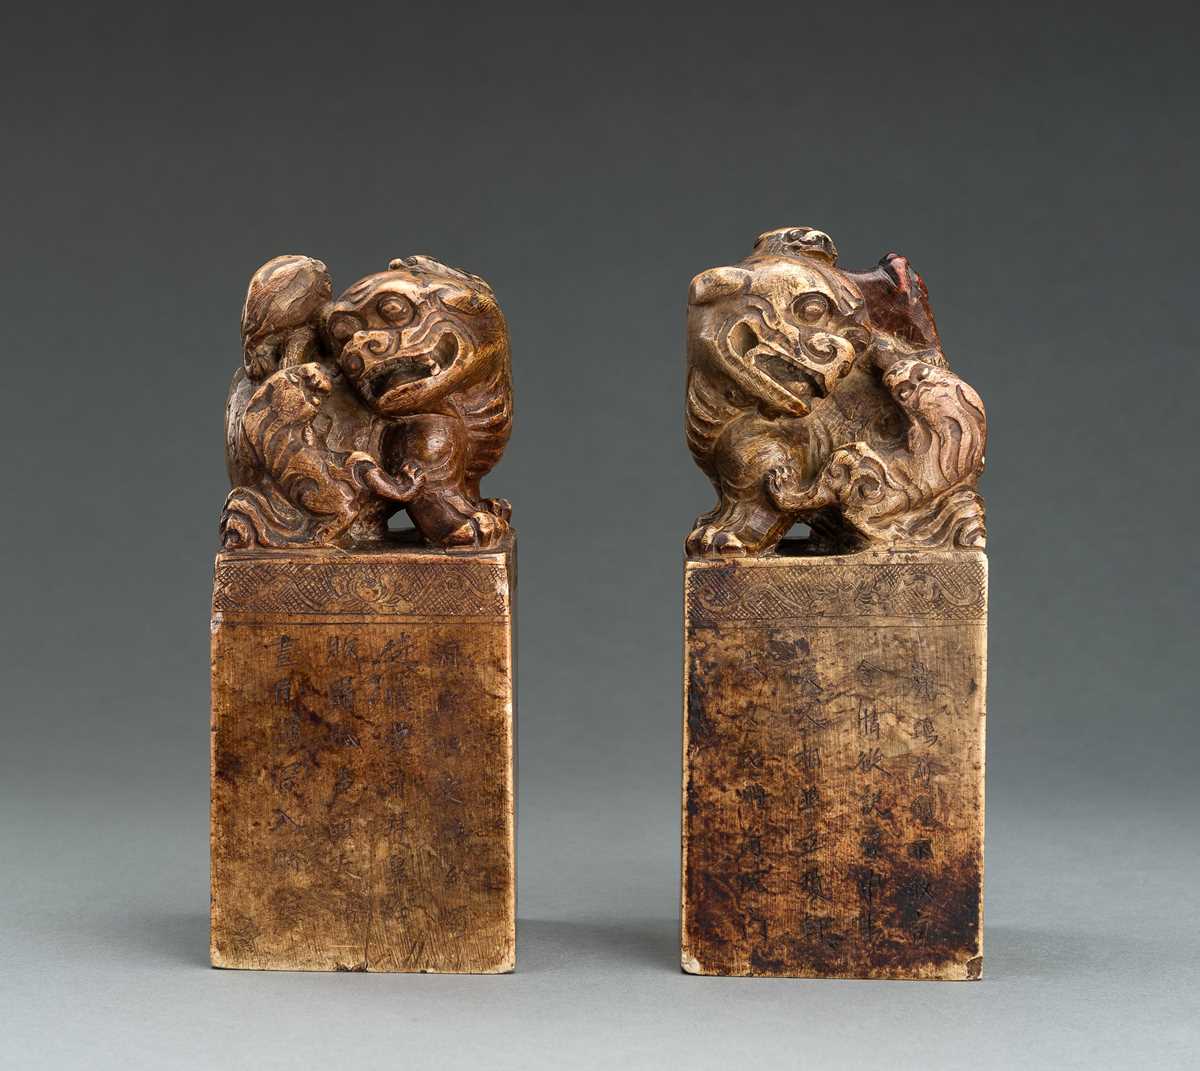 Lot 92 - A LARGE PAIR OF ‘BUDDHIST LIONS’ SOAPSTONE SEALS